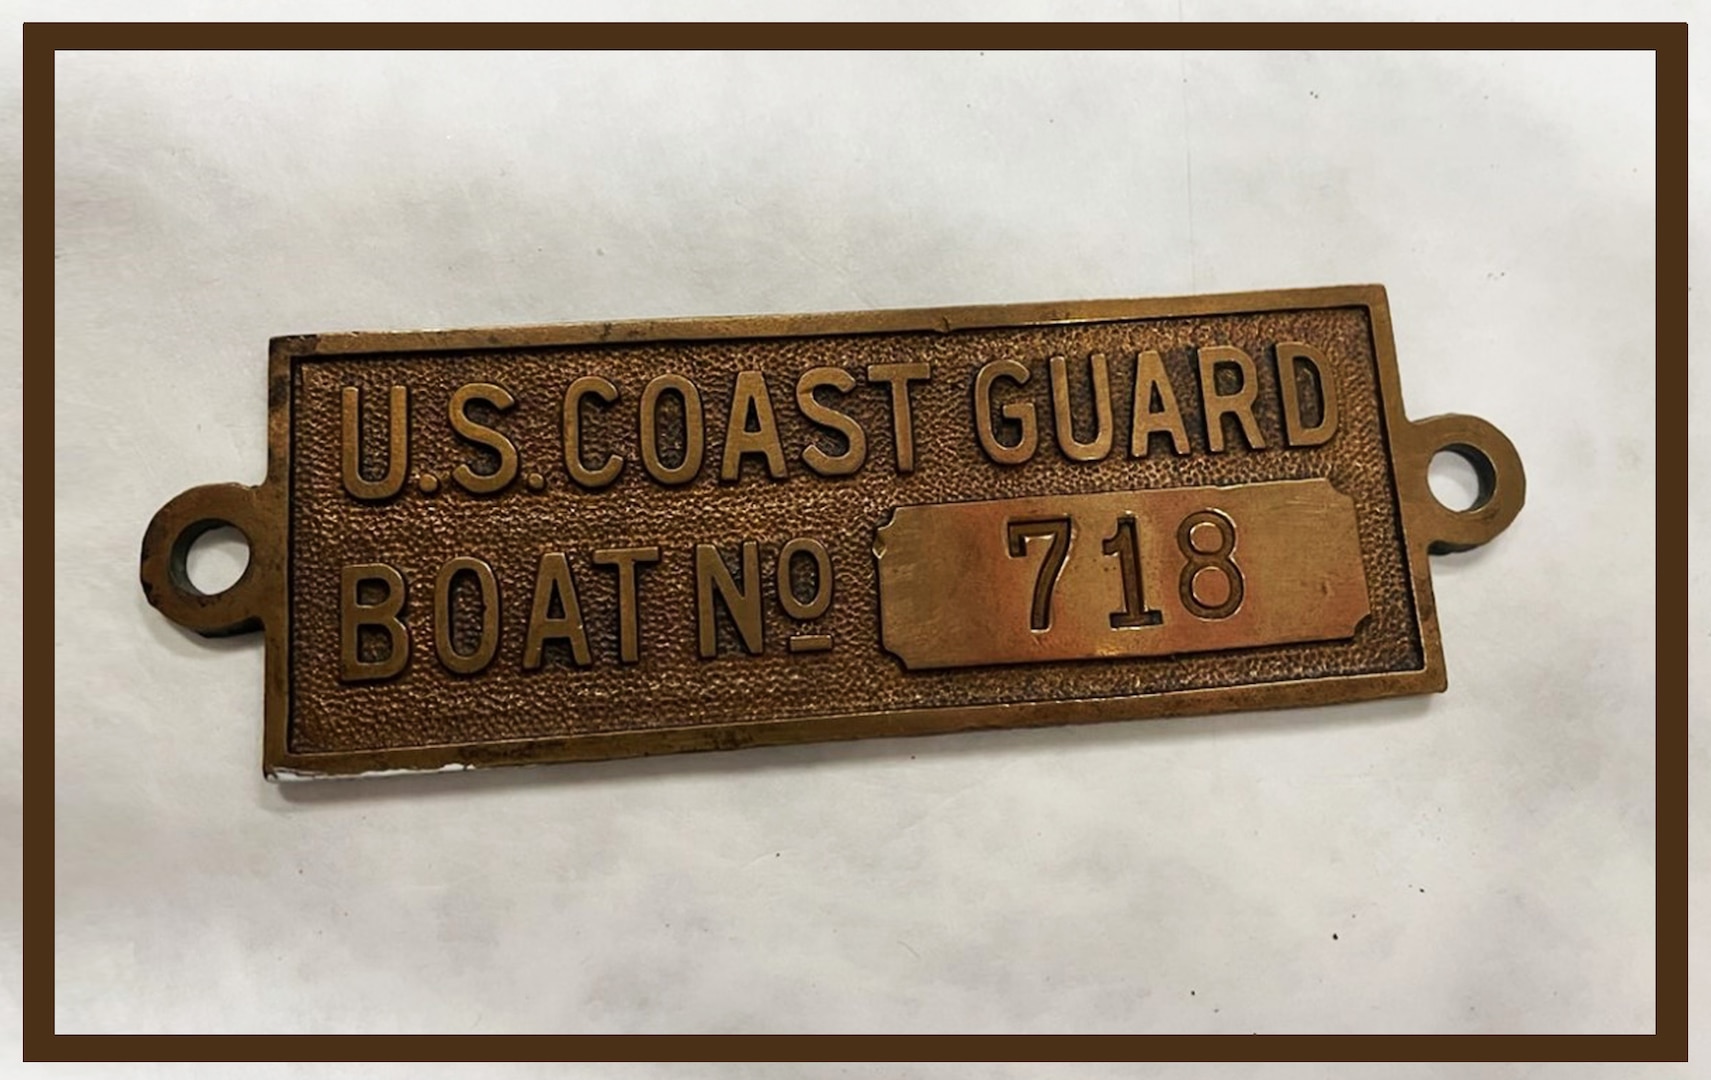 The bonze placard is the only verified artifact from the Coast Guard Cutter Tampa, which sank in September 1918 off the coast of Wales, just before the end of World War I.